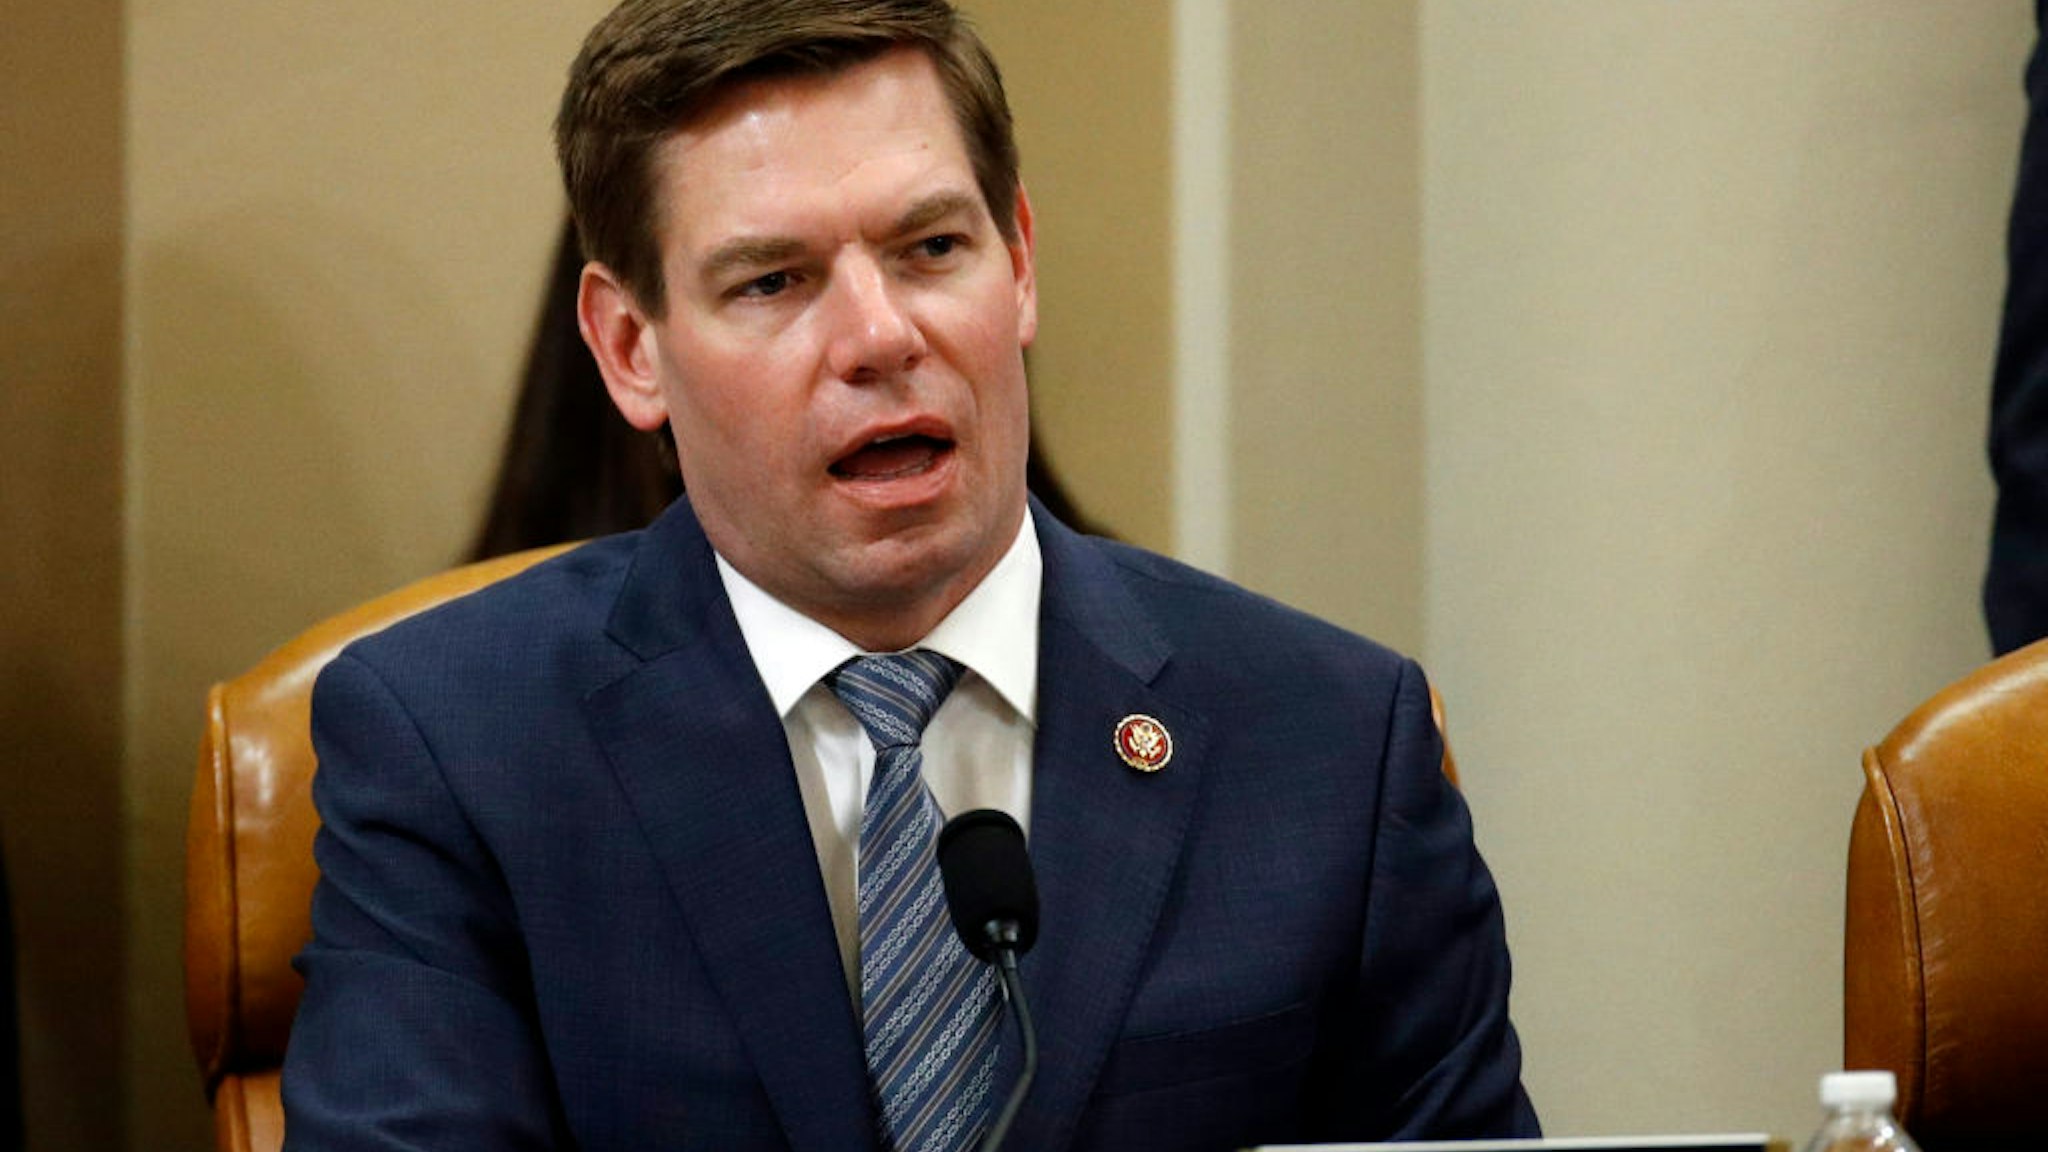 Rep. Eric Swalwell, D-Calf., votes to approve the second article of impeachment as the House Judiciary Committee holds a public hearing to vote on the two articles of impeachment against U.S. President Donald Trump in the Longworth House Office Building on Capitol Hill December 13, 2019 in Washington, DC.